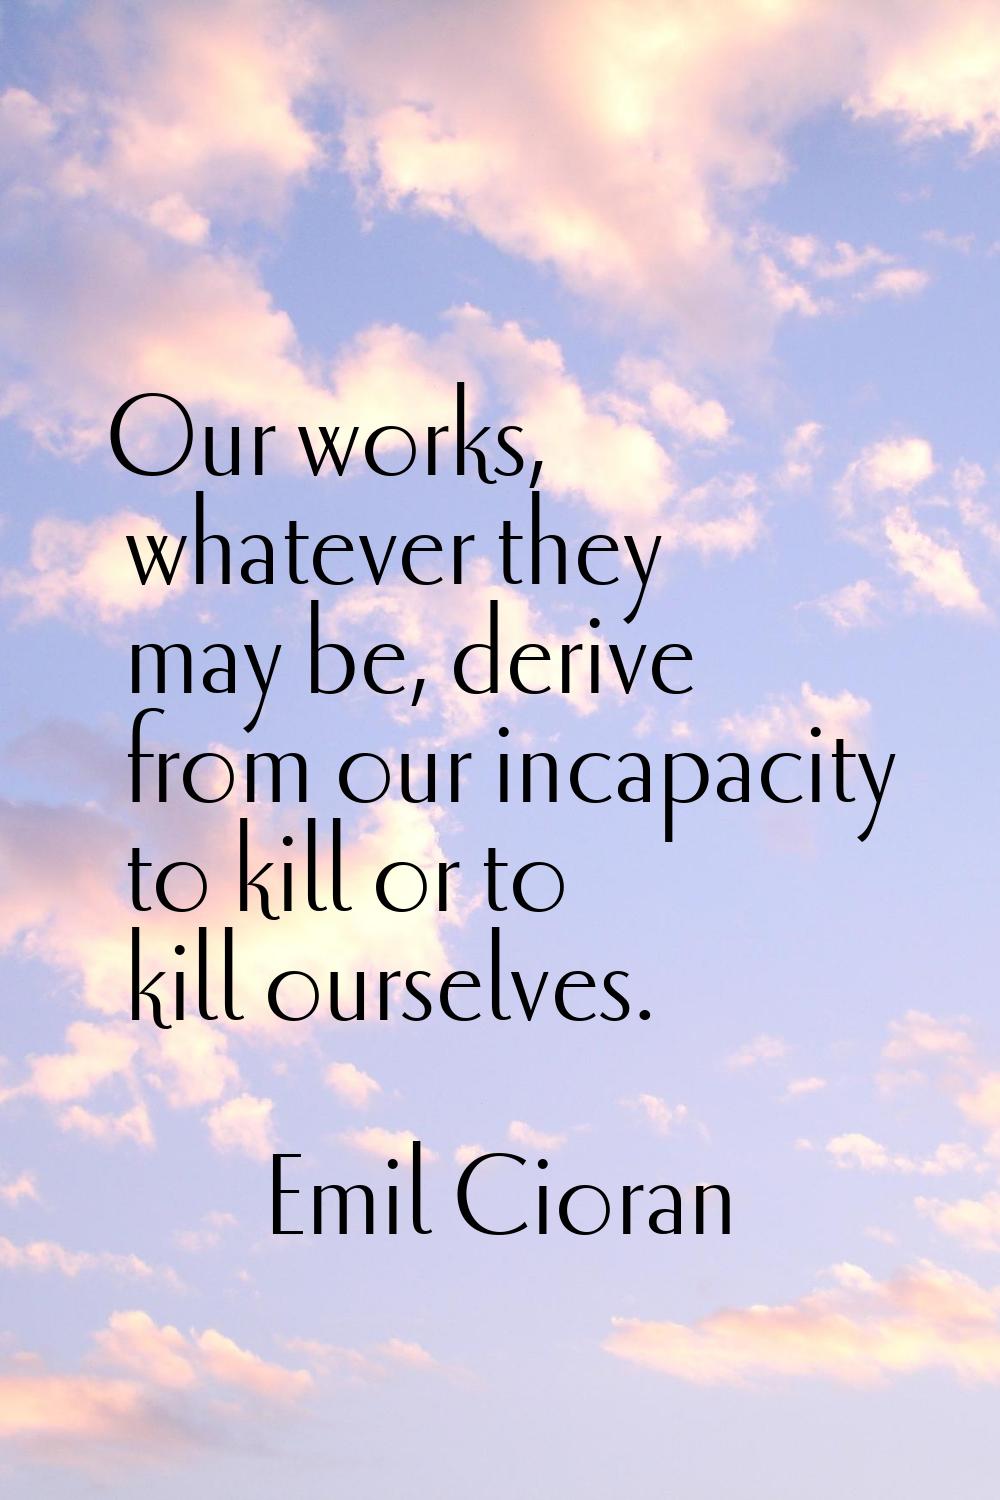 Our works, whatever they may be, derive from our incapacity to kill or to kill ourselves.